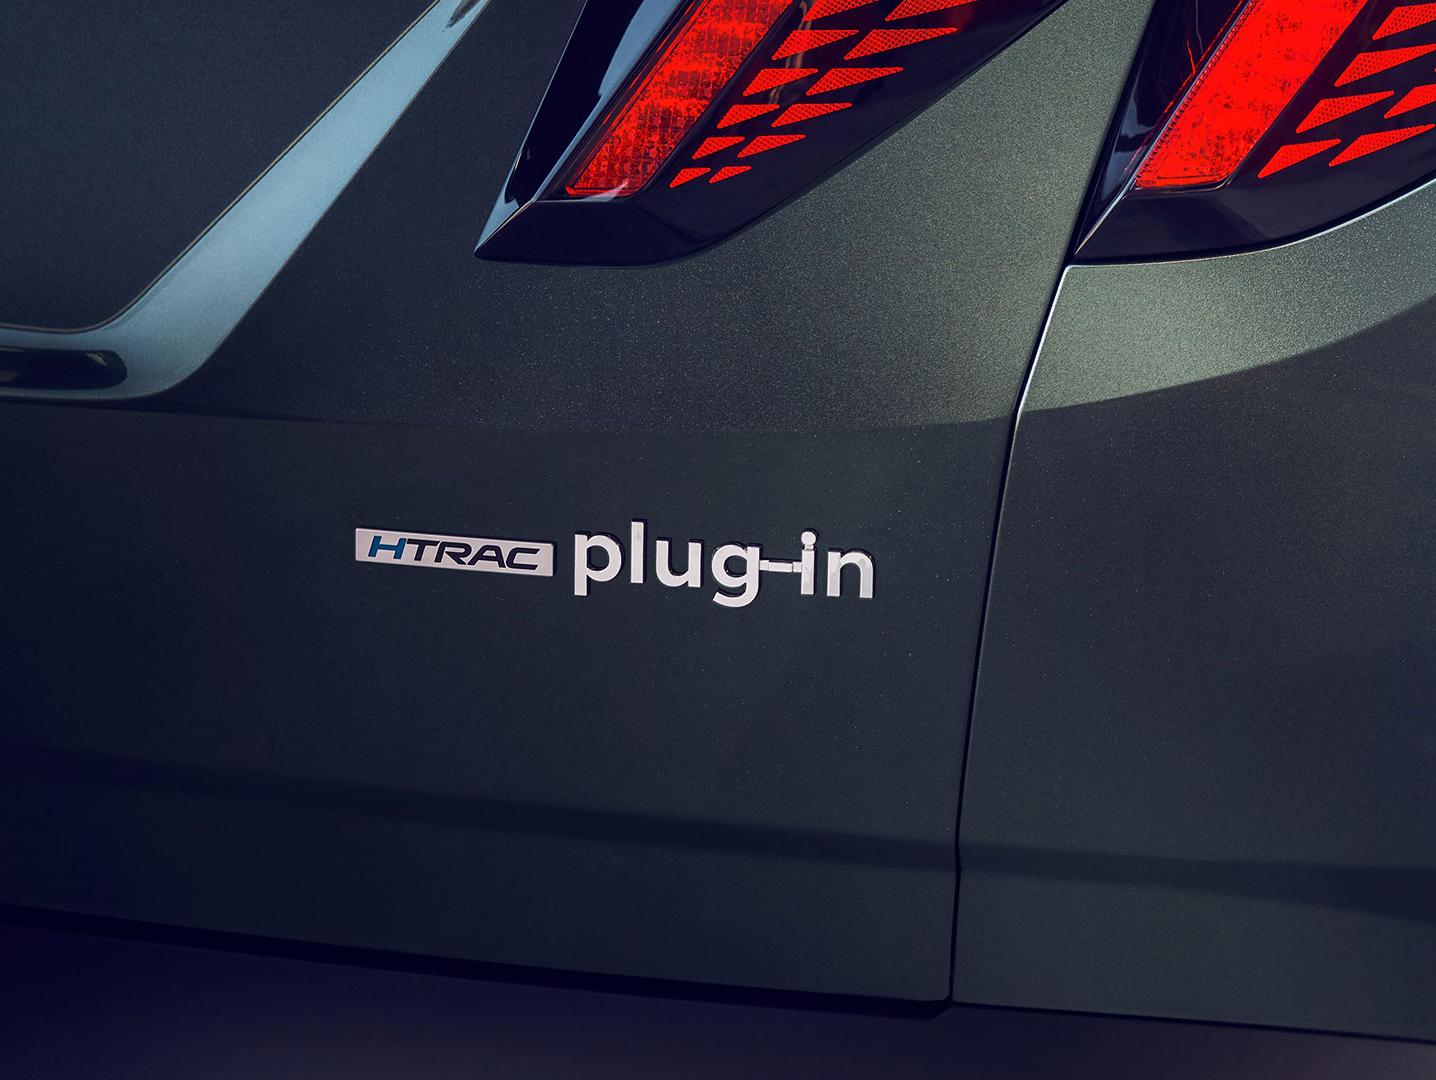 Our electrified Features plug-in.